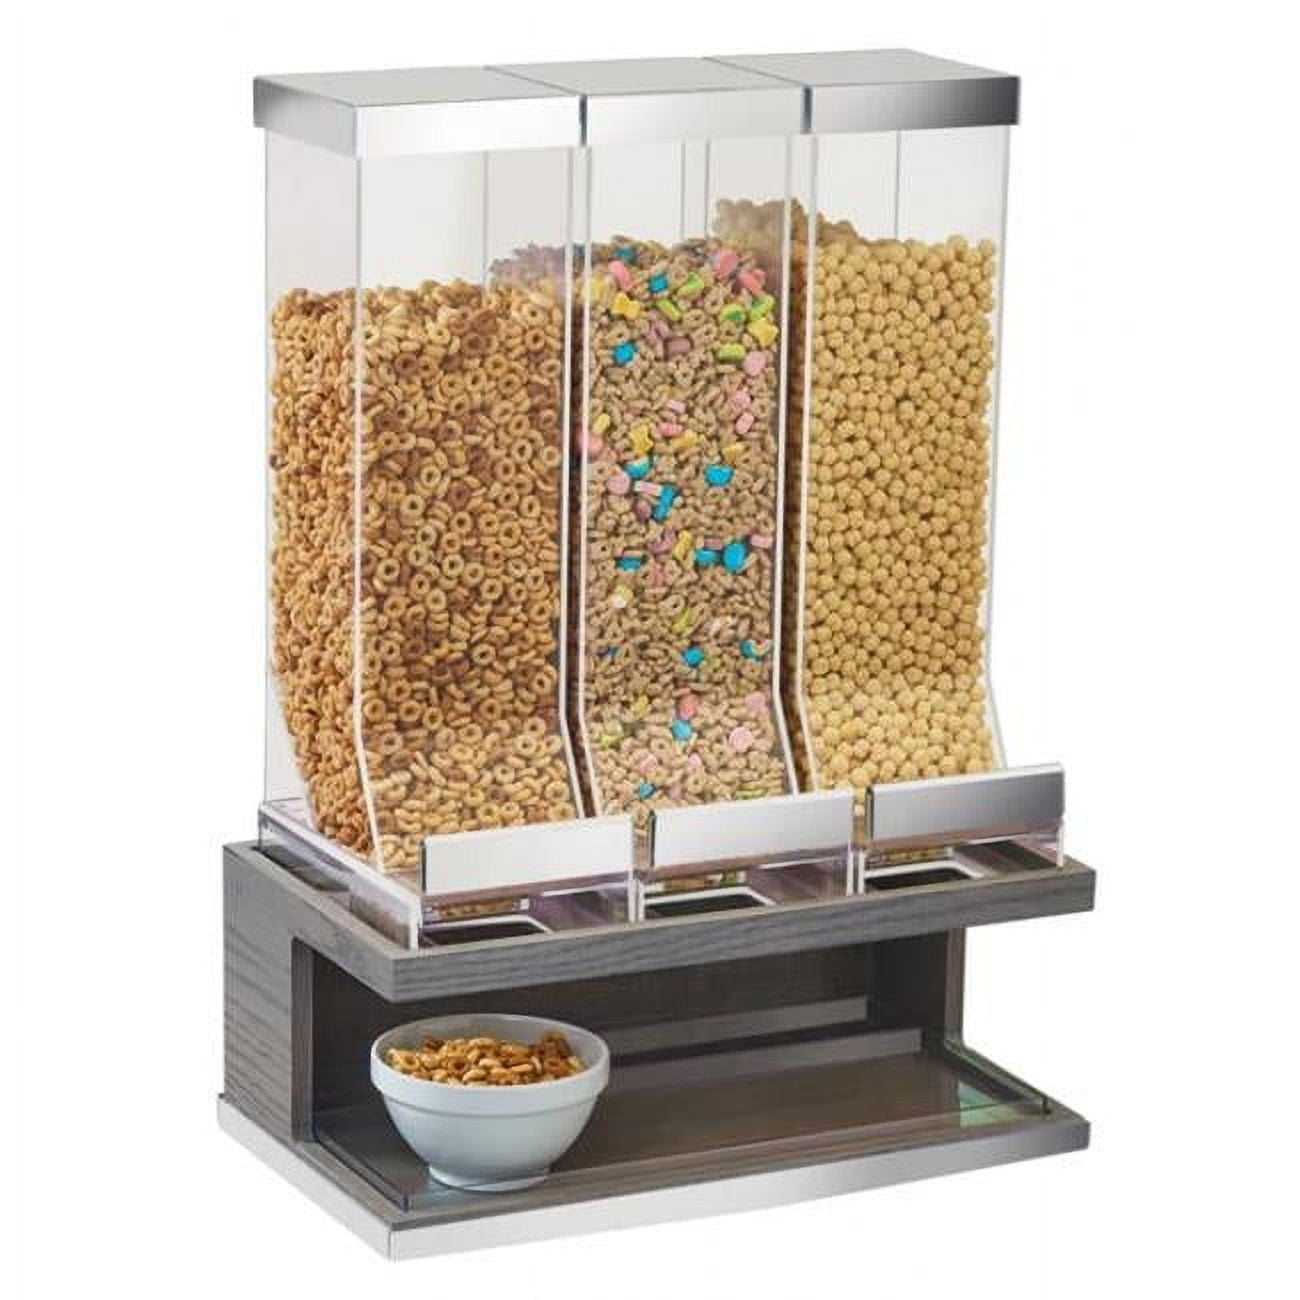 3823-83 Ashwood 3 Compartment Gray Oak Wood Cereal Dispenser - 17.5 X 9.5 X 24 In.